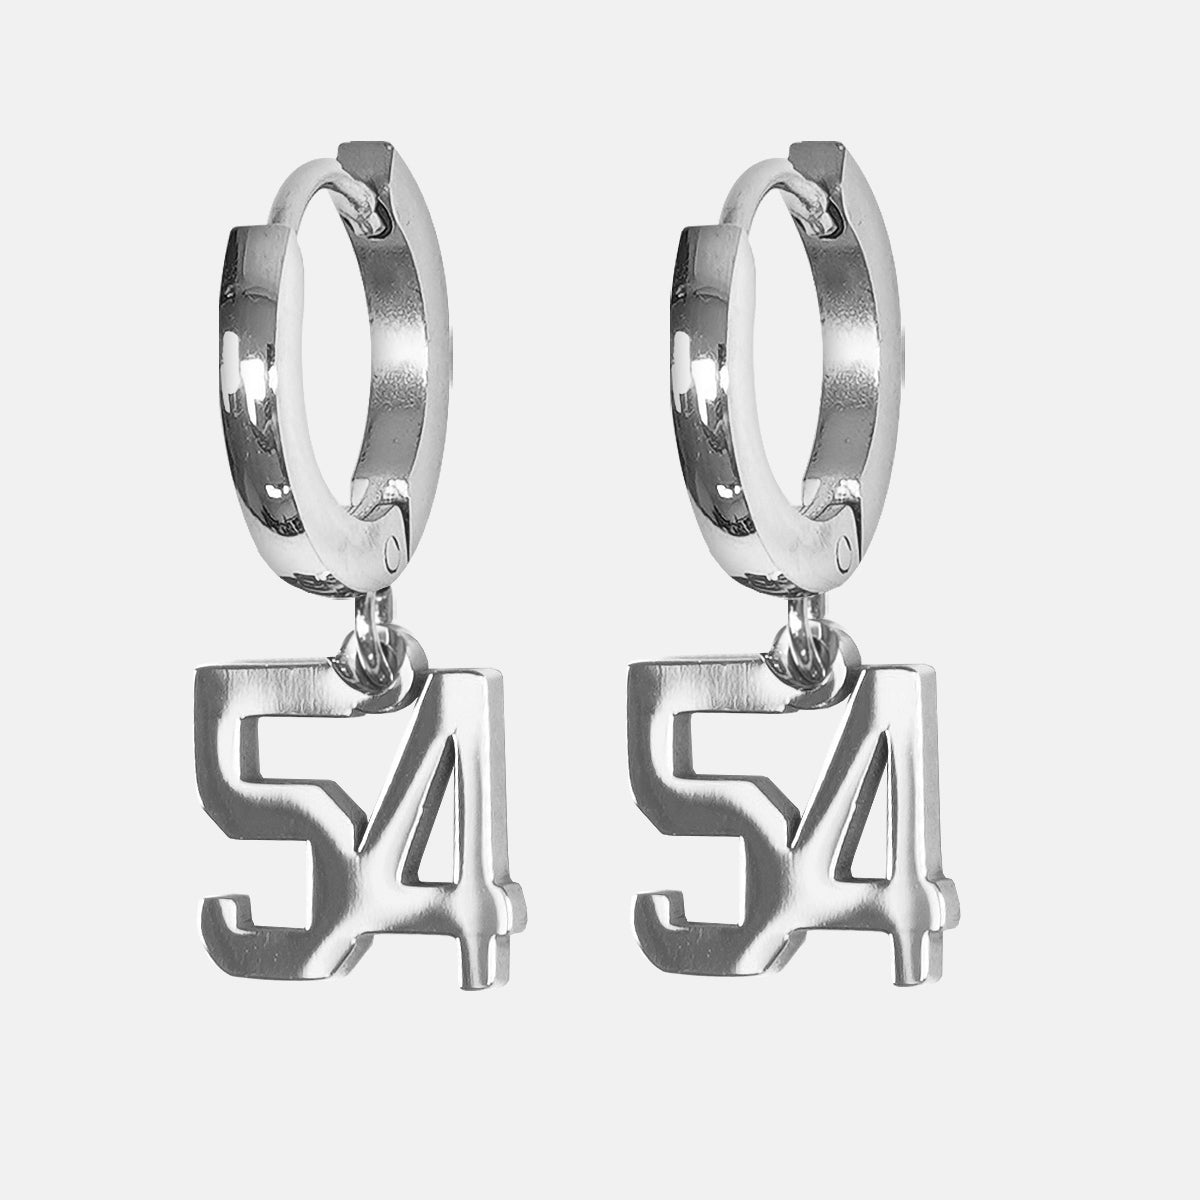 54 Number Earring - Stainless Steel